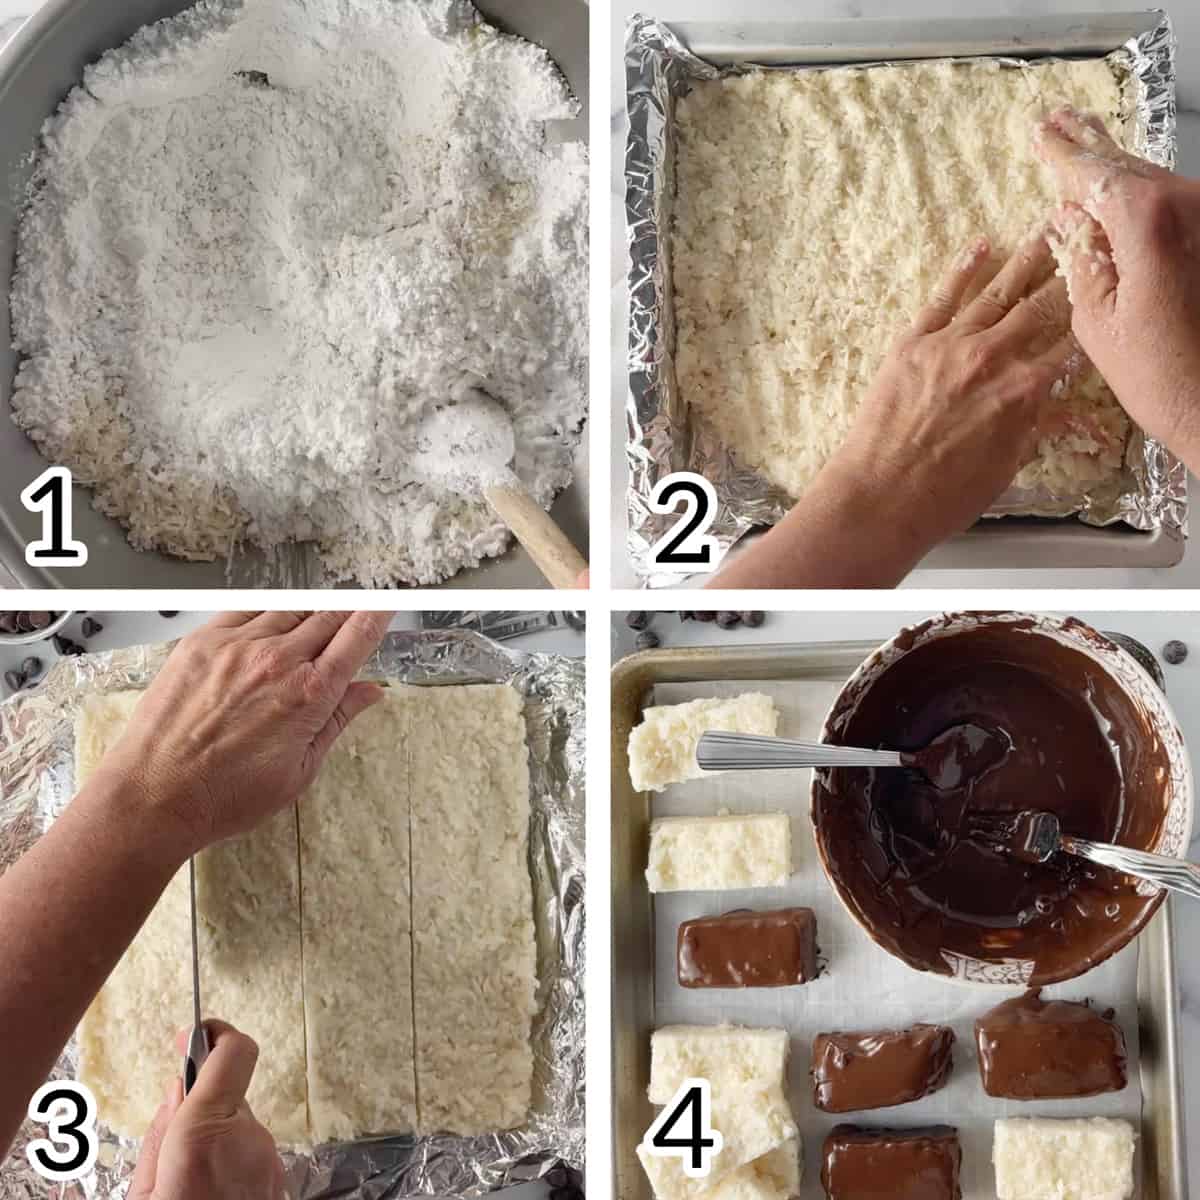 How to make a homemade version of Mounds candy.